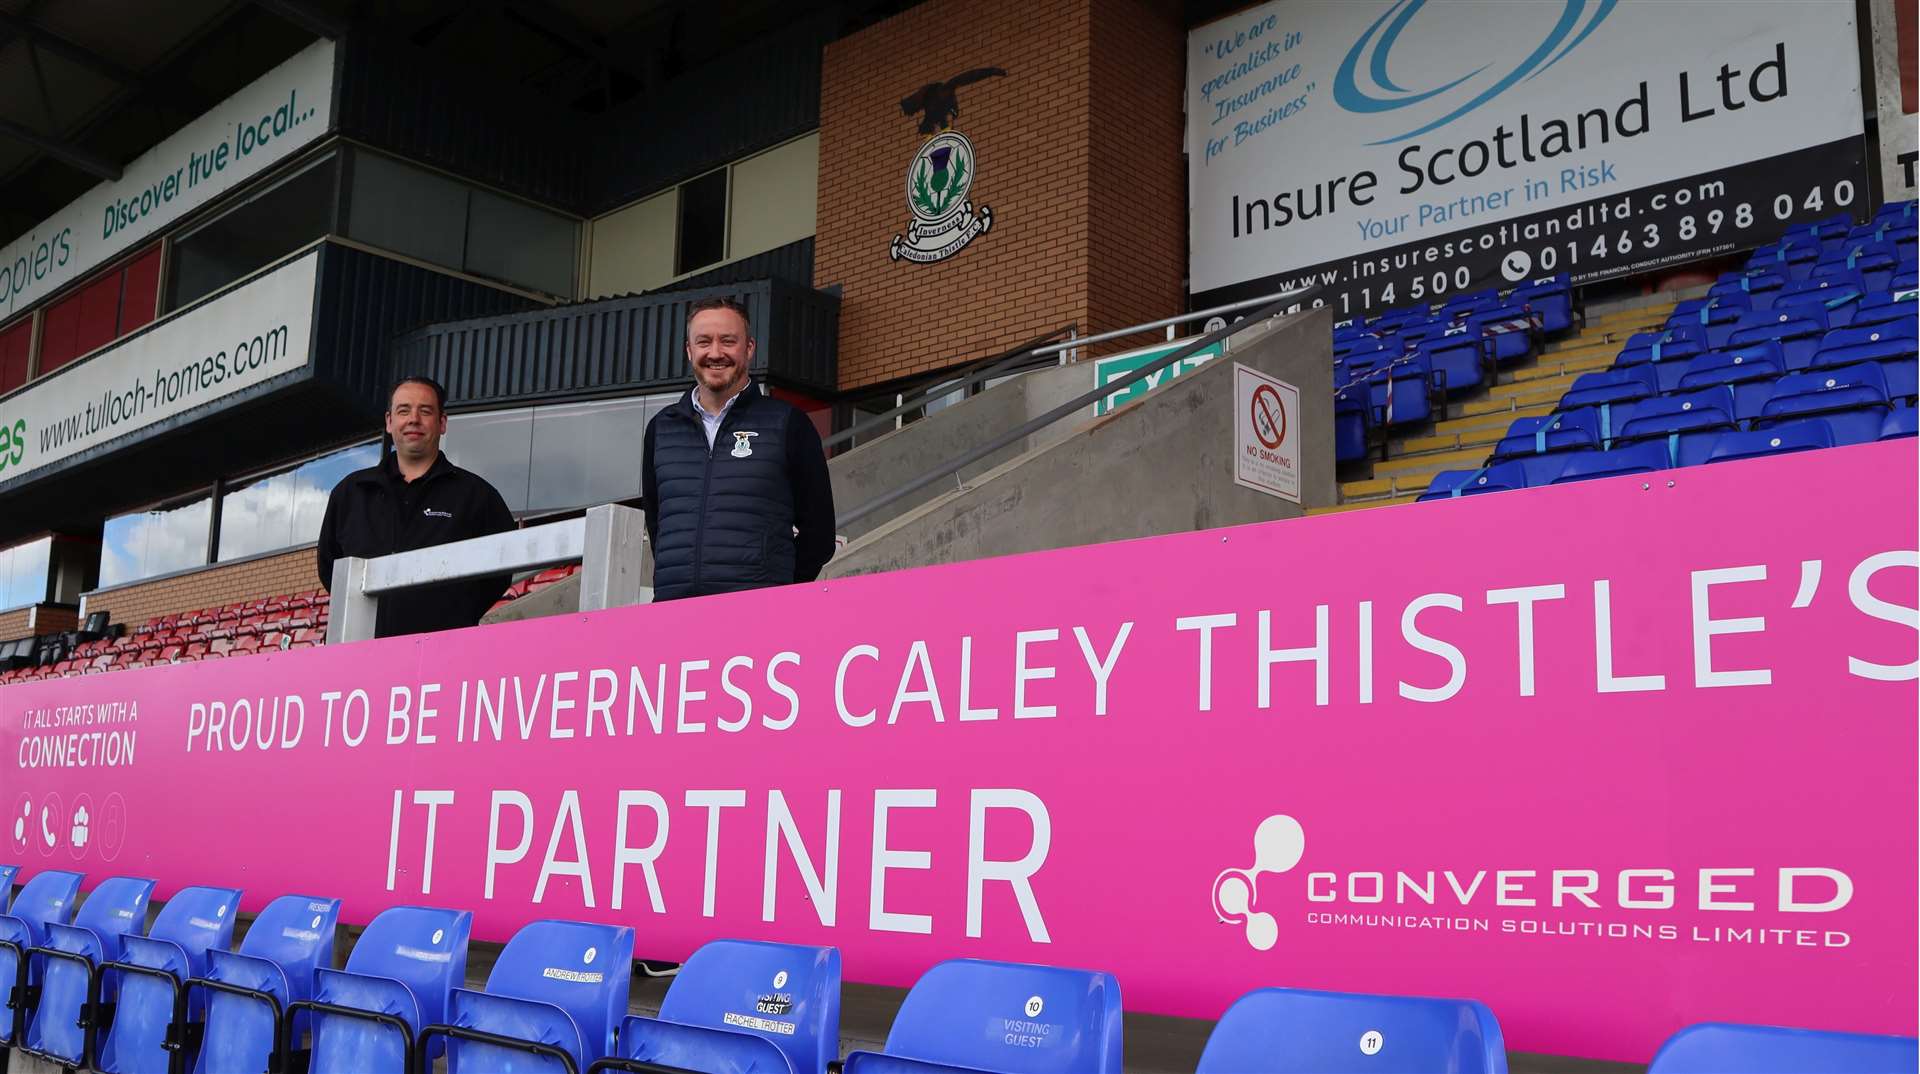 Left to Right: Converged General Manager Andy McKay and ICTFC Commercial Director Keith Haggart unveil the IT partnership